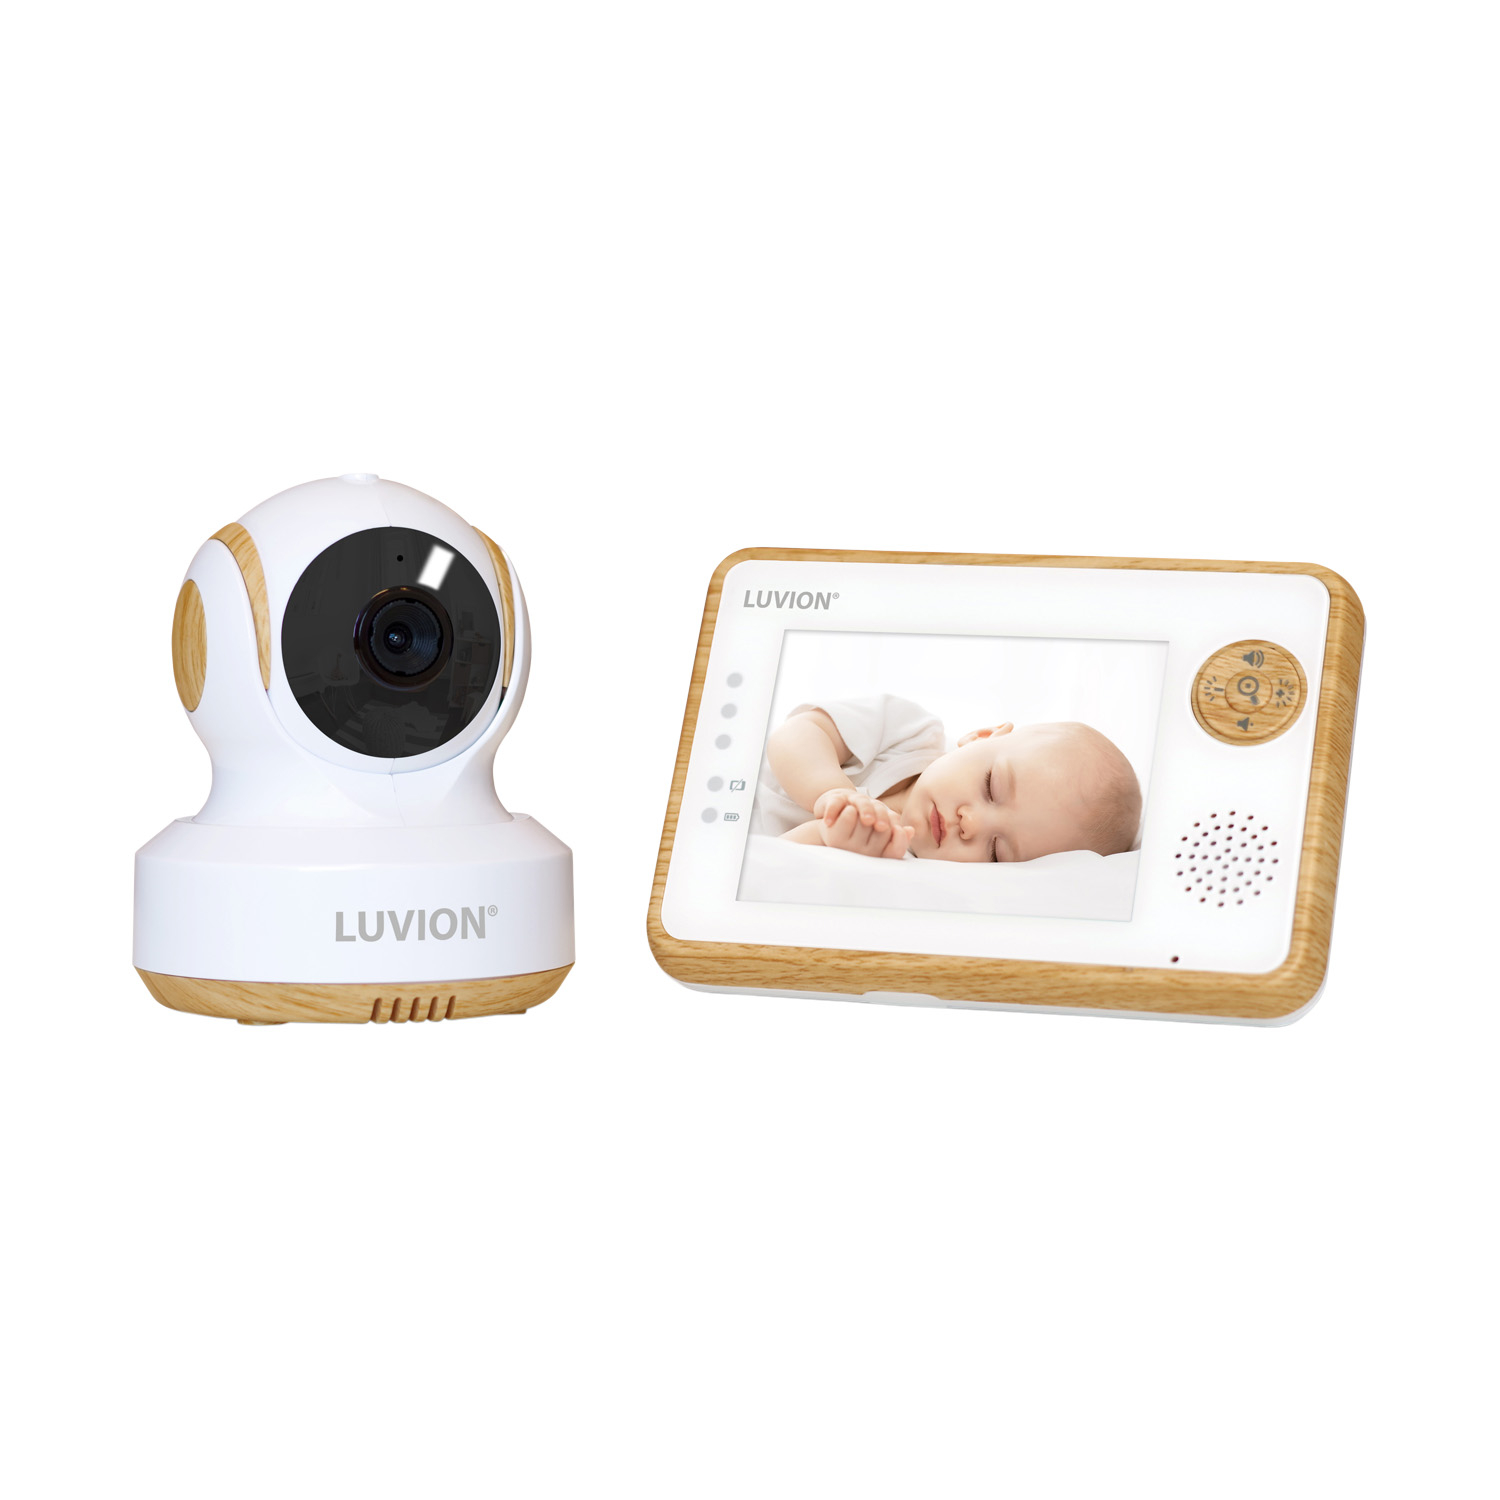 Luvion Essential Babyfoon Limited Edition aanbieding